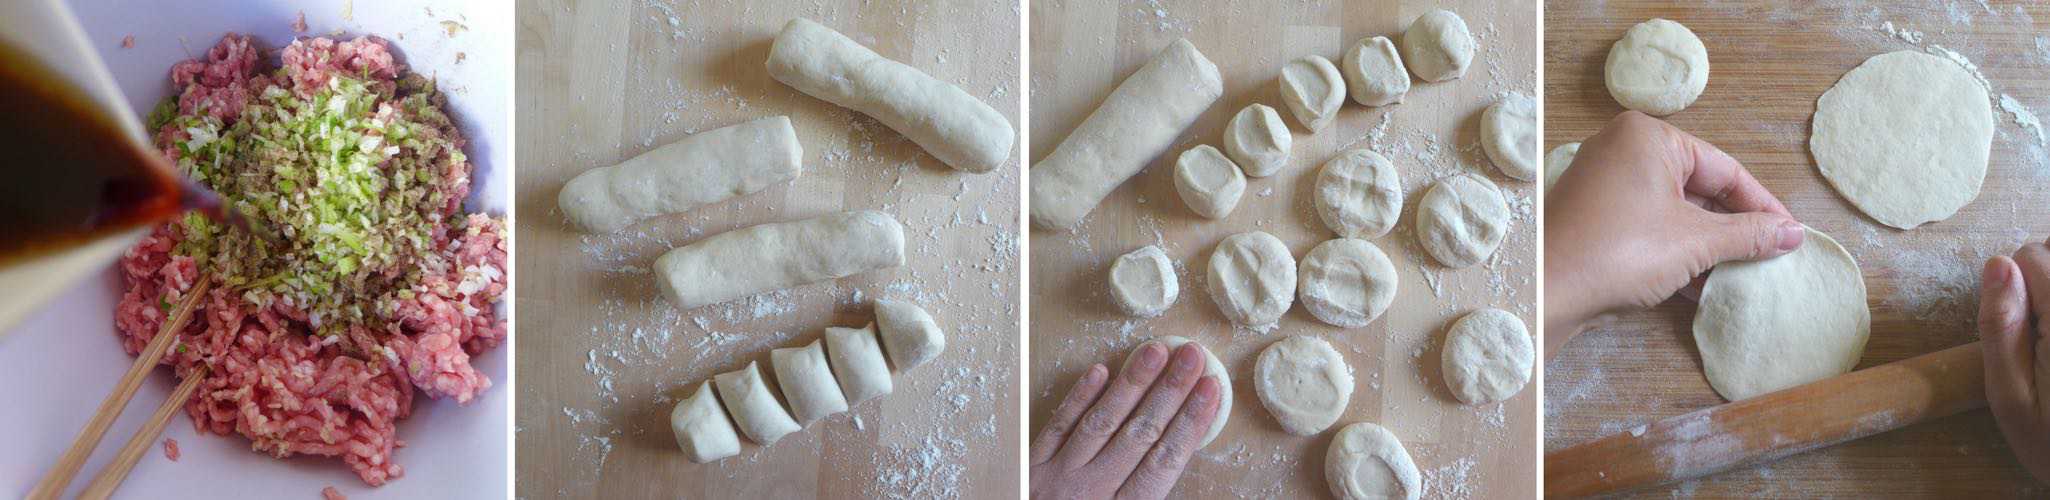 Four steps photos showing how to prepare the wrappers for Sheng Jian Bao (pan-fried pork buns)